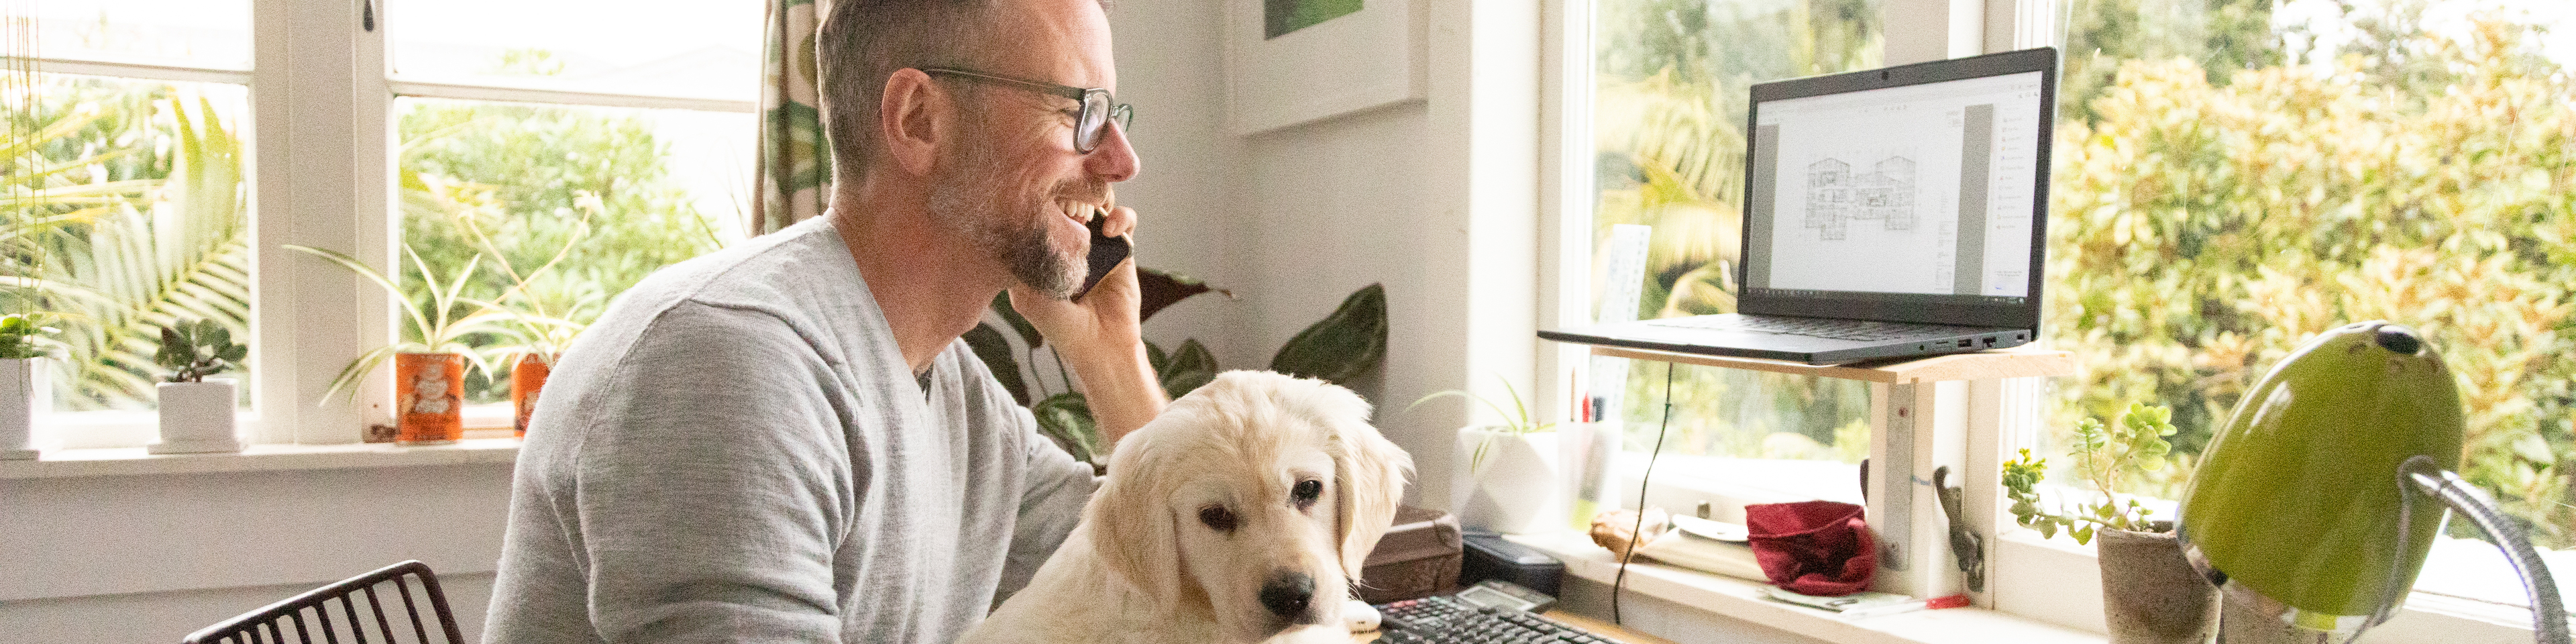 Man Working from Home with a Dog in lap